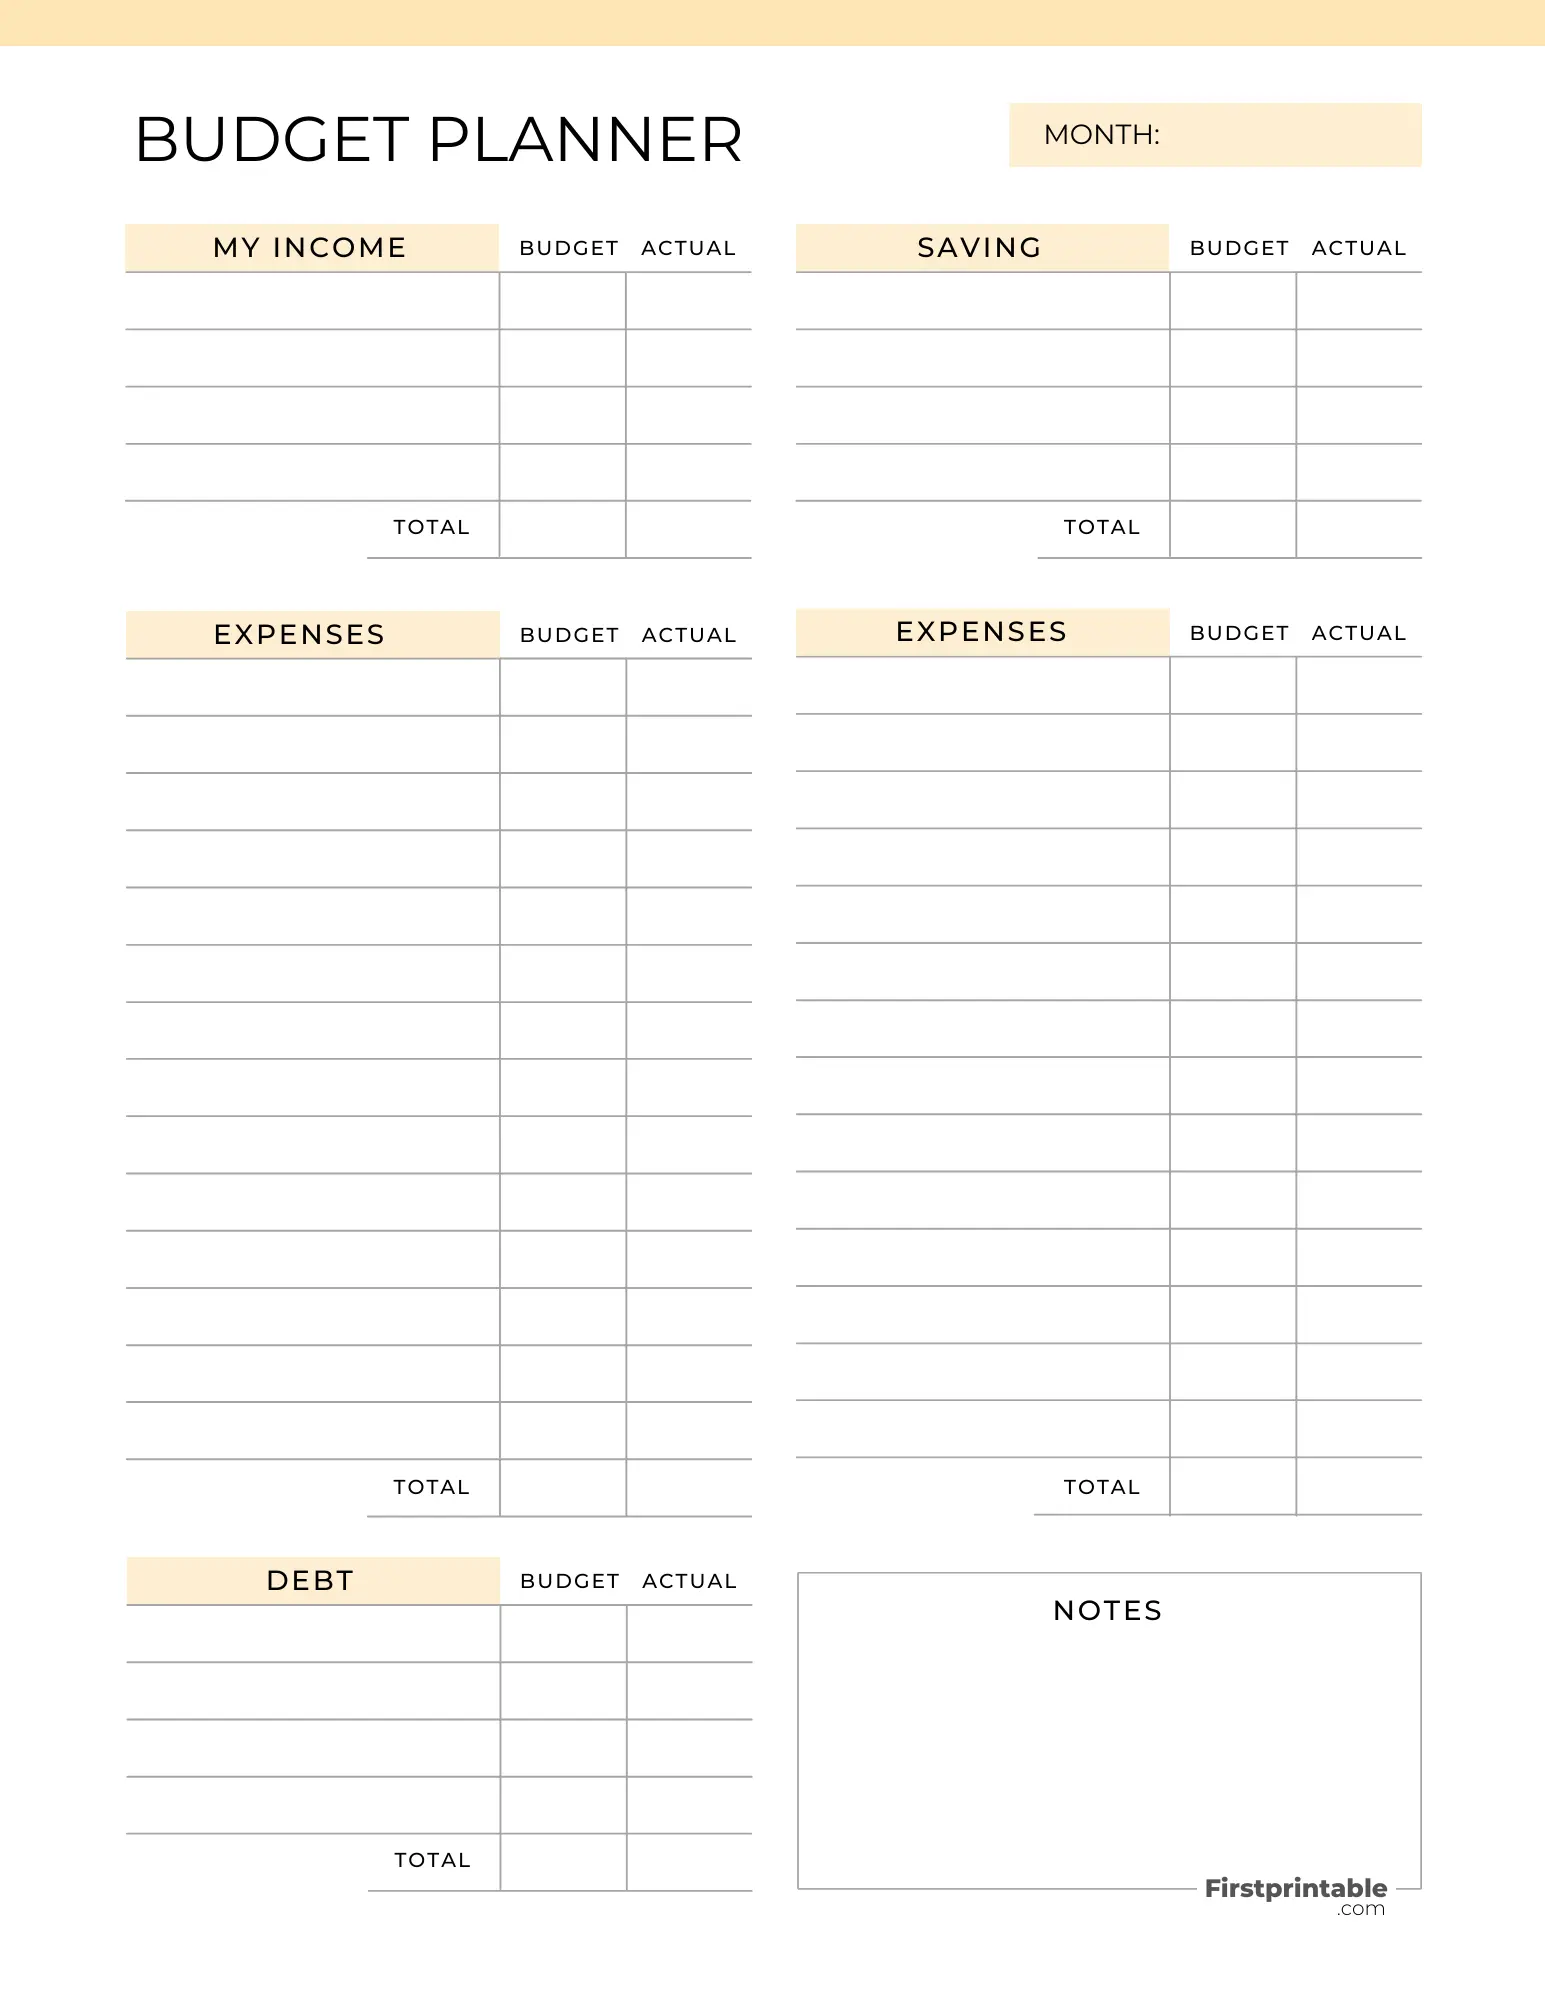 Monthly Budget Planner - aesthetic Yellow Color